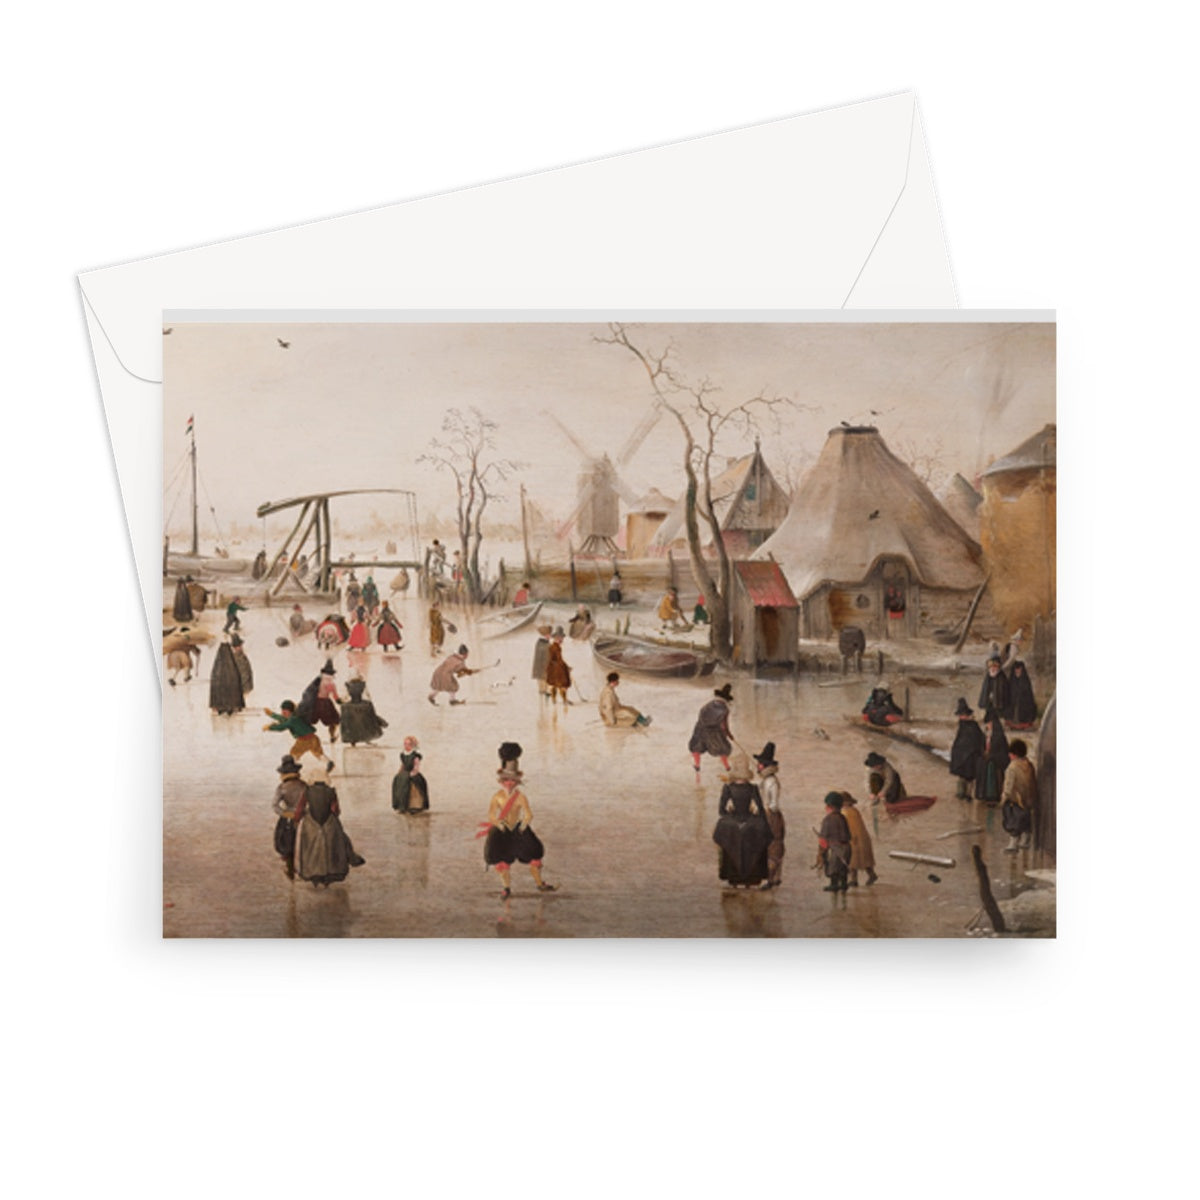 Ice-Skating in a Village by Hendrick Avercamp, c. 1610 - Greetings Card